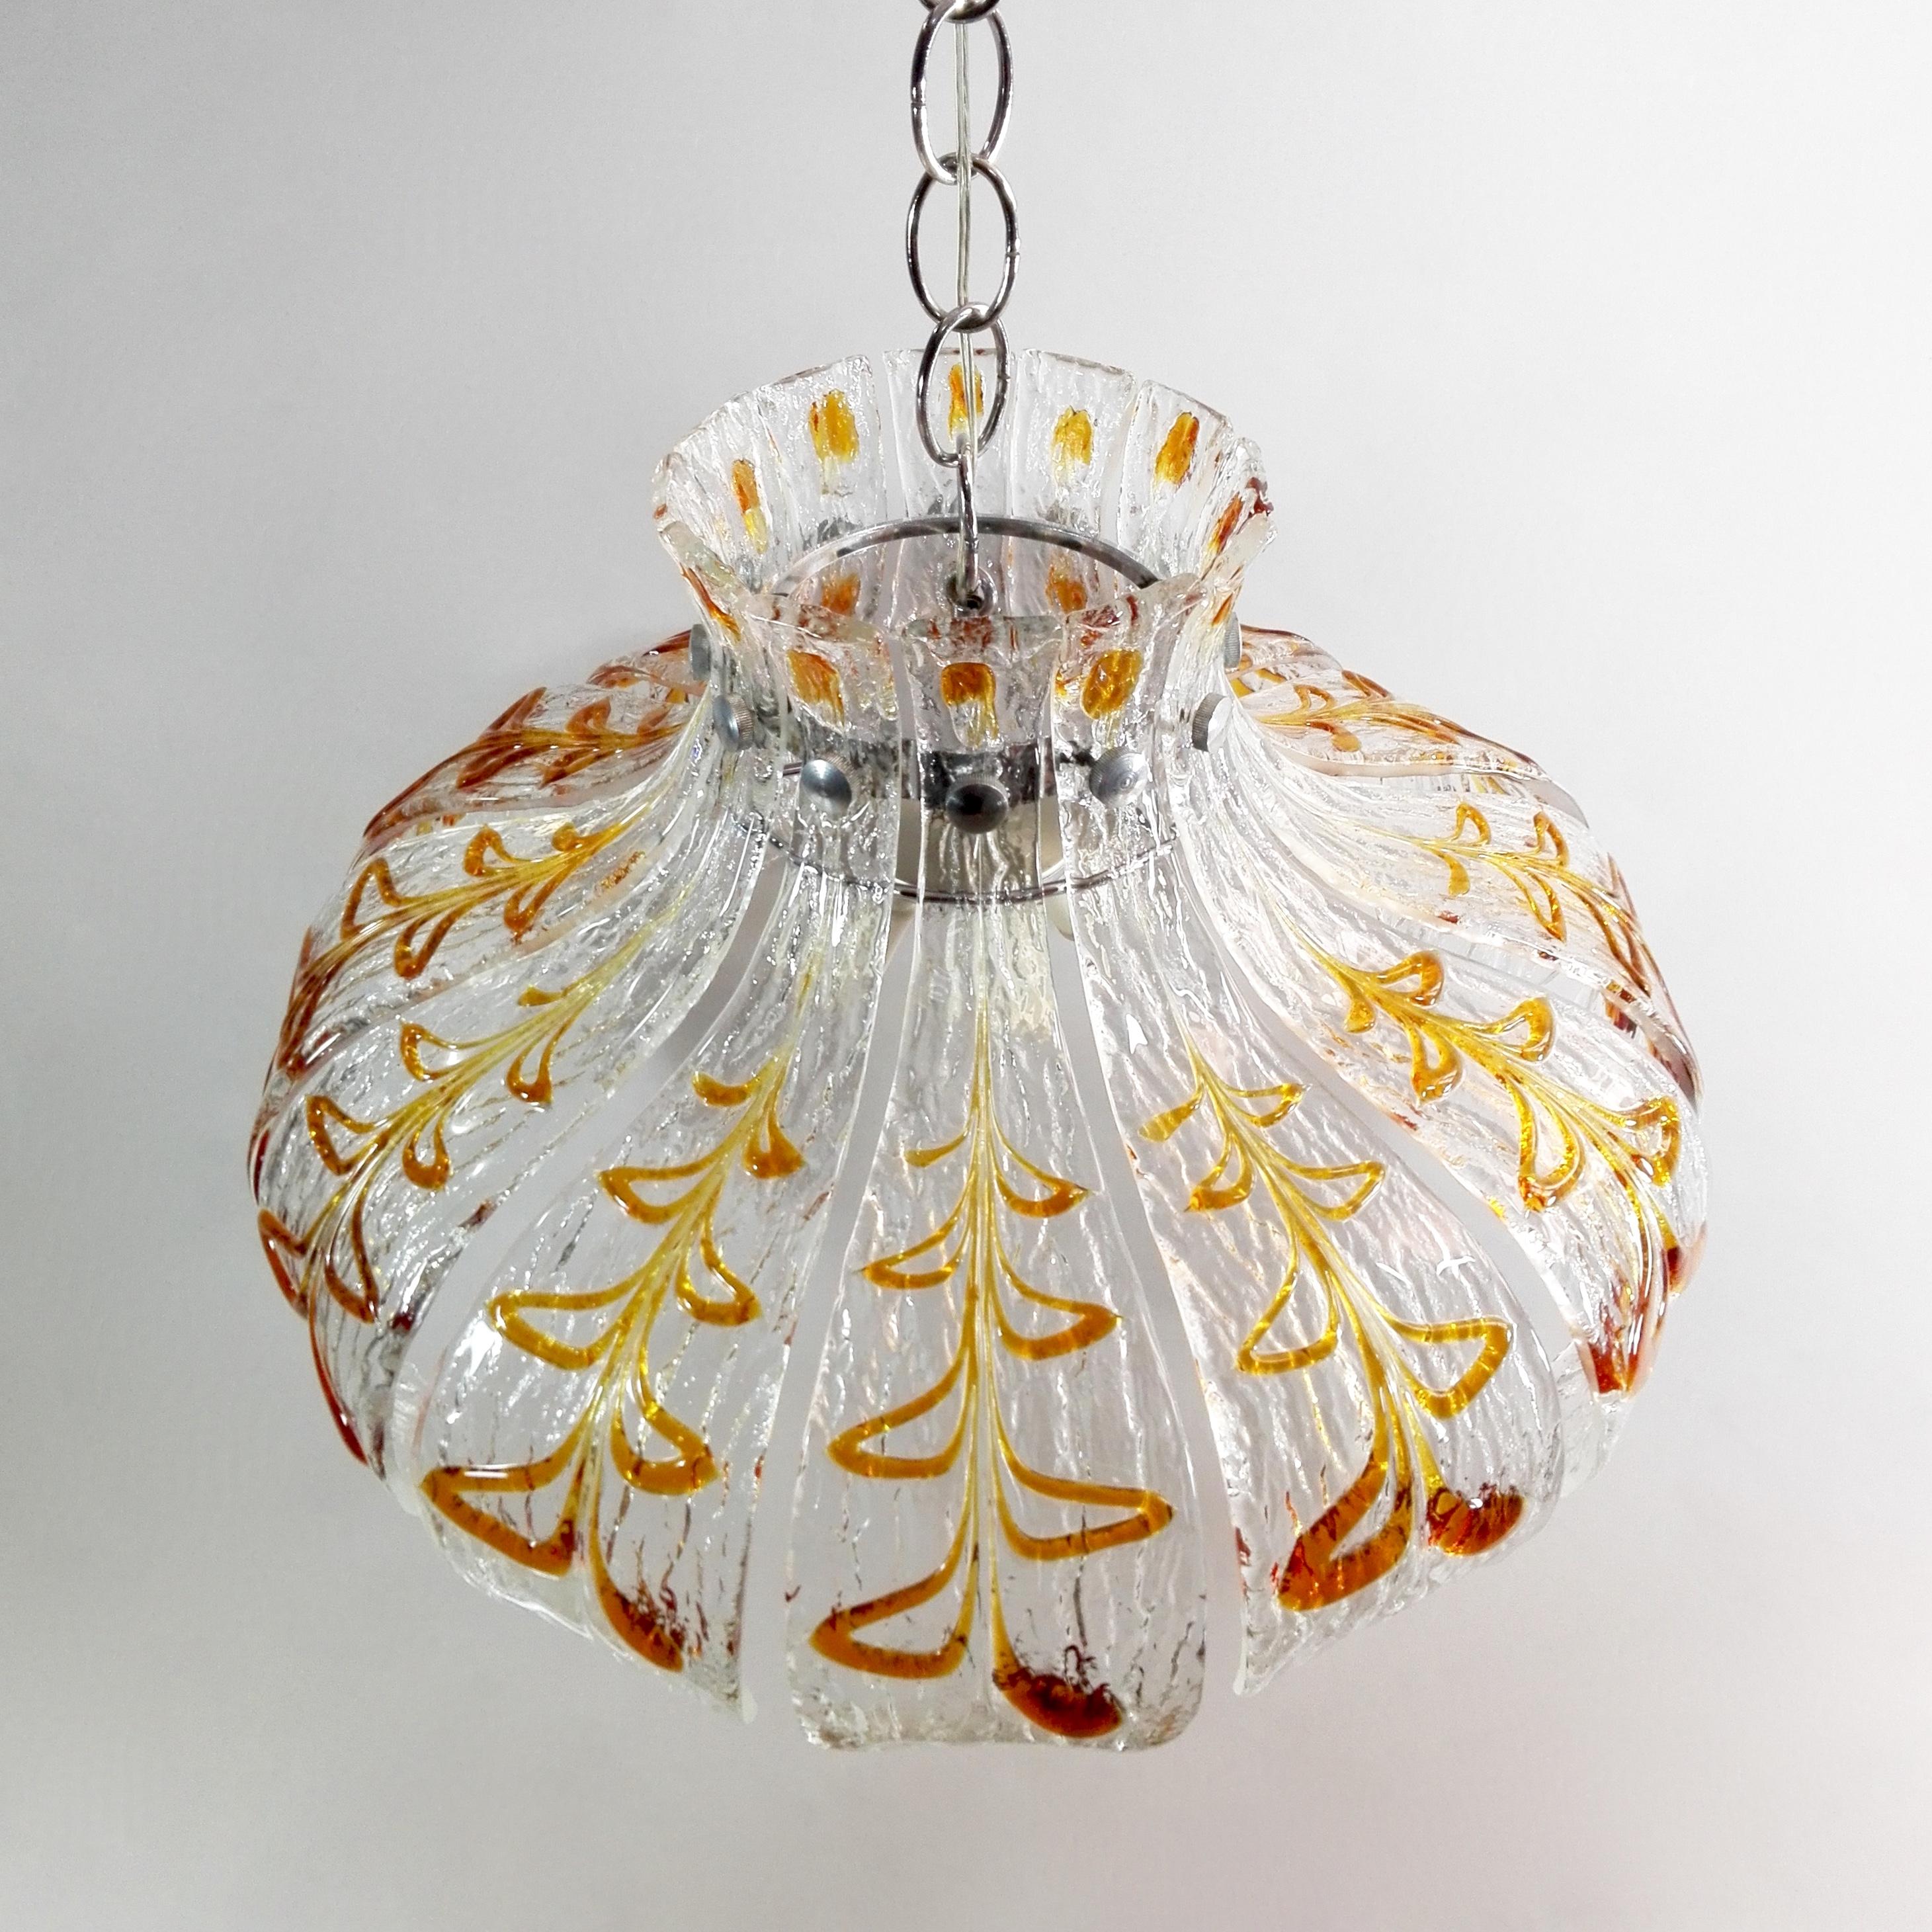 1970s Carlo Nason Murano Hand-Blown Glass Four-Light Flower-Shaped Chandelier In Good Condition For Sale In Caprino Veronese, VR